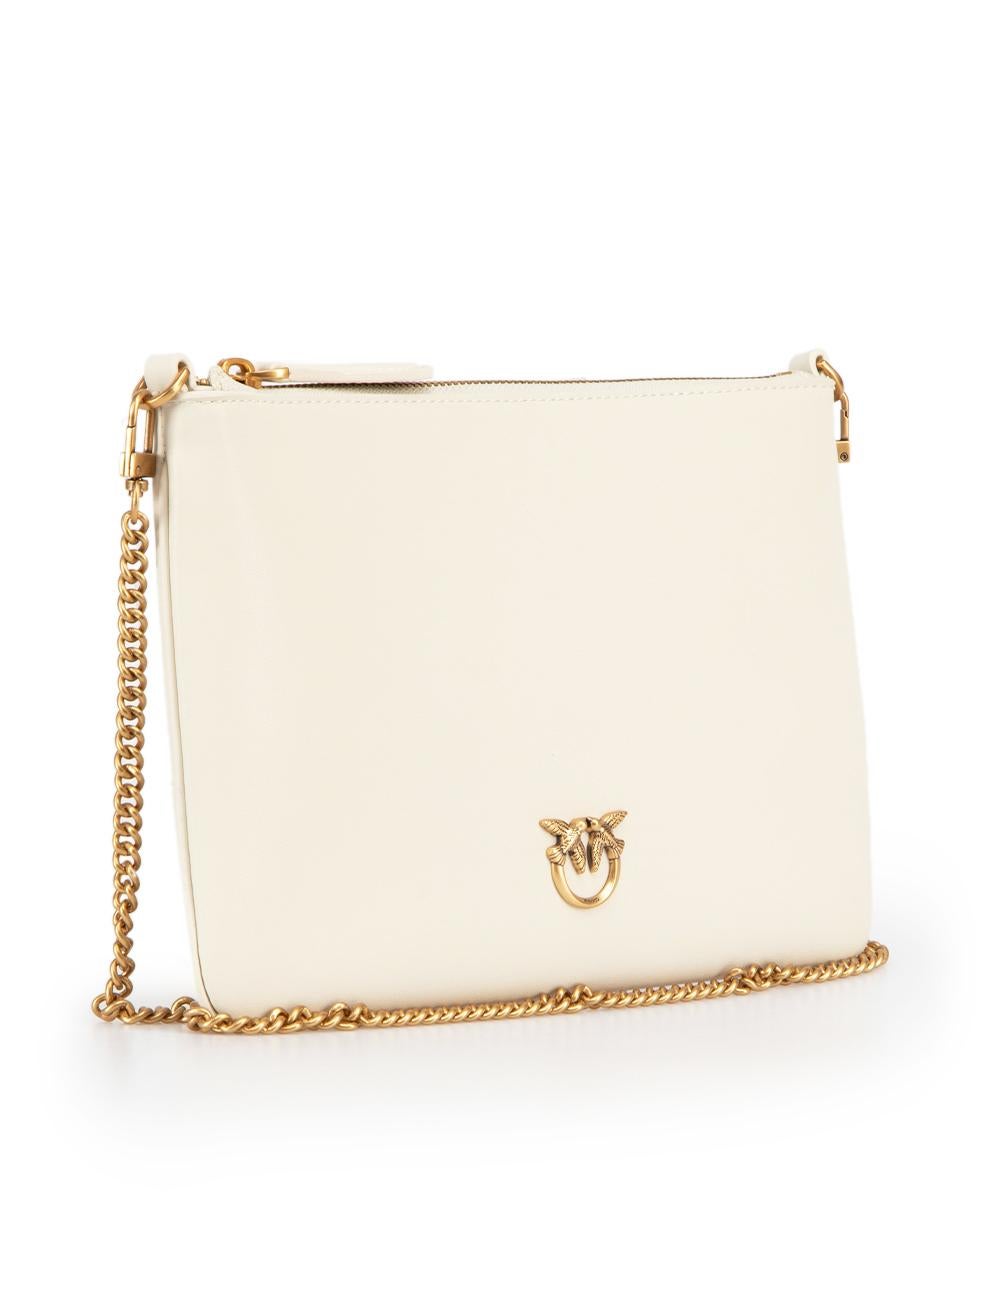 CONDITION is New with tags on this brand new Pinko designer item. This item comes with original packaging.
 
 
 
 Details
 
 
 Flat Classic
 
 White
 
 Leather
 
 Mini crossbody bag
 
 Gold tone hardware
 
 Lovebirds embellishment
 
 Detachable